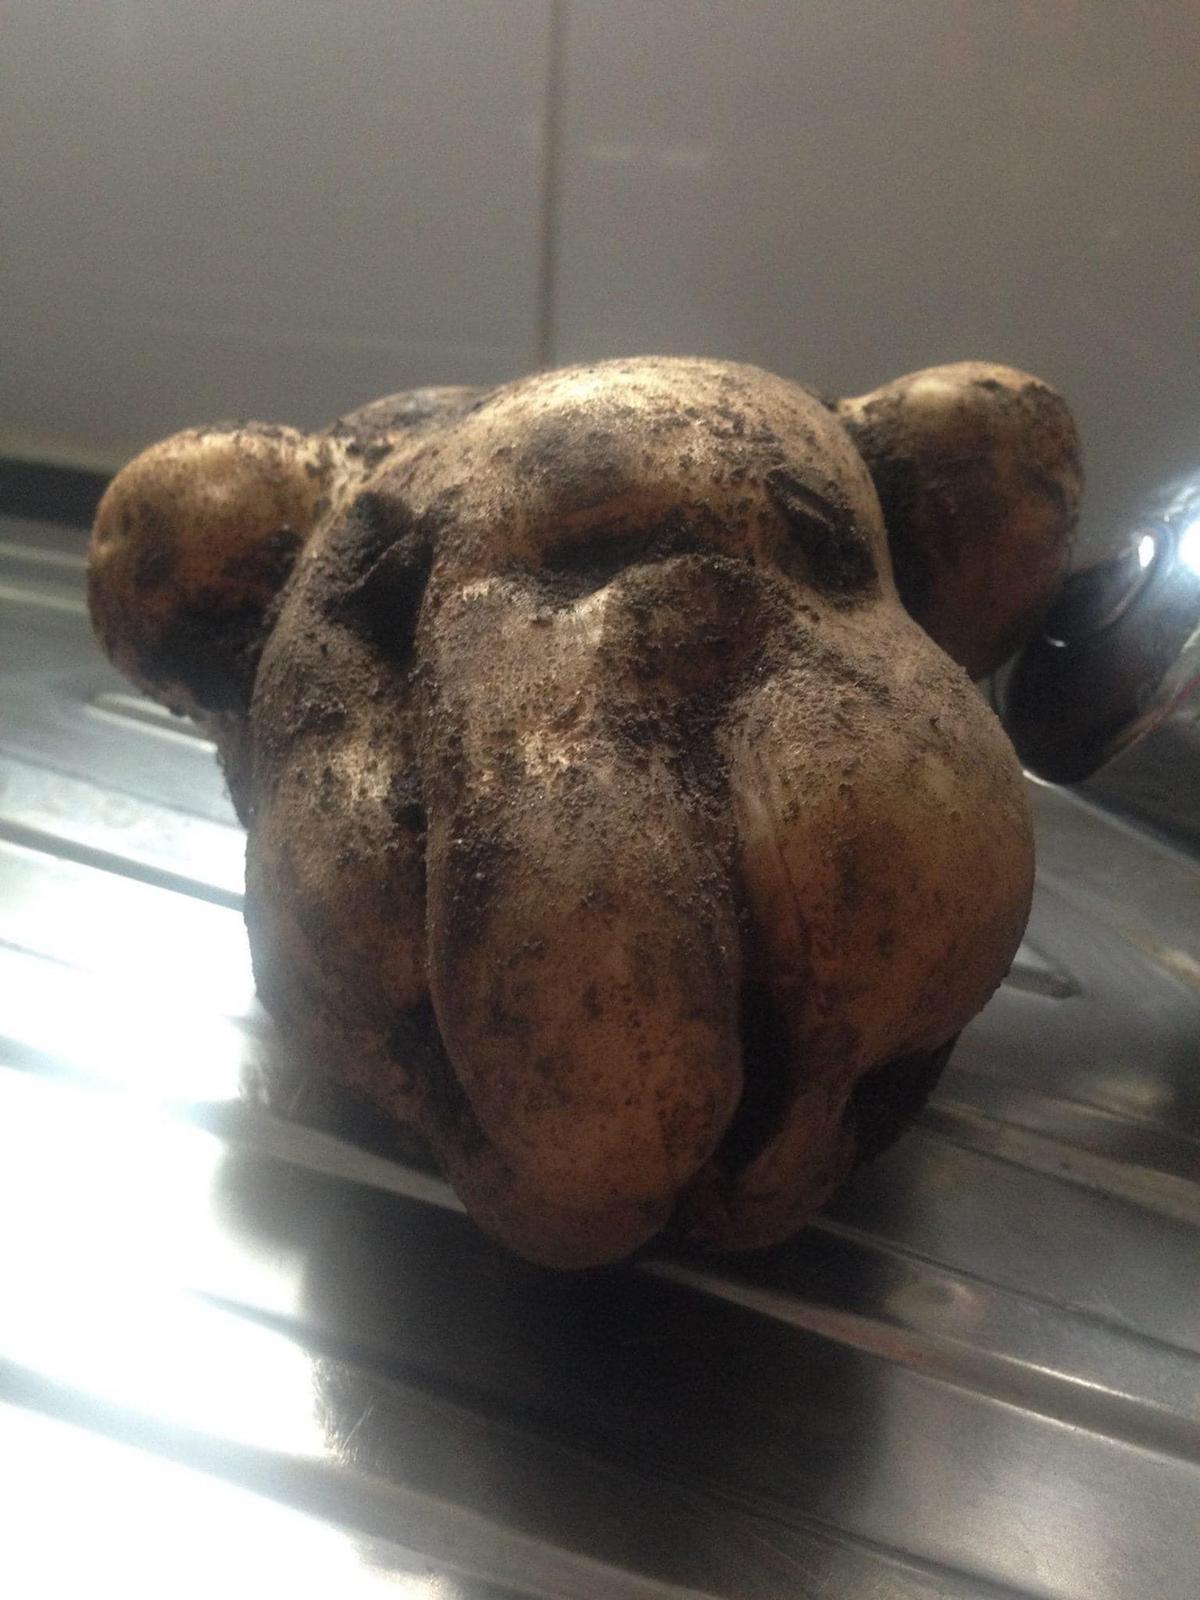 The potato resembling Dave the American bulldog. (Caters News)